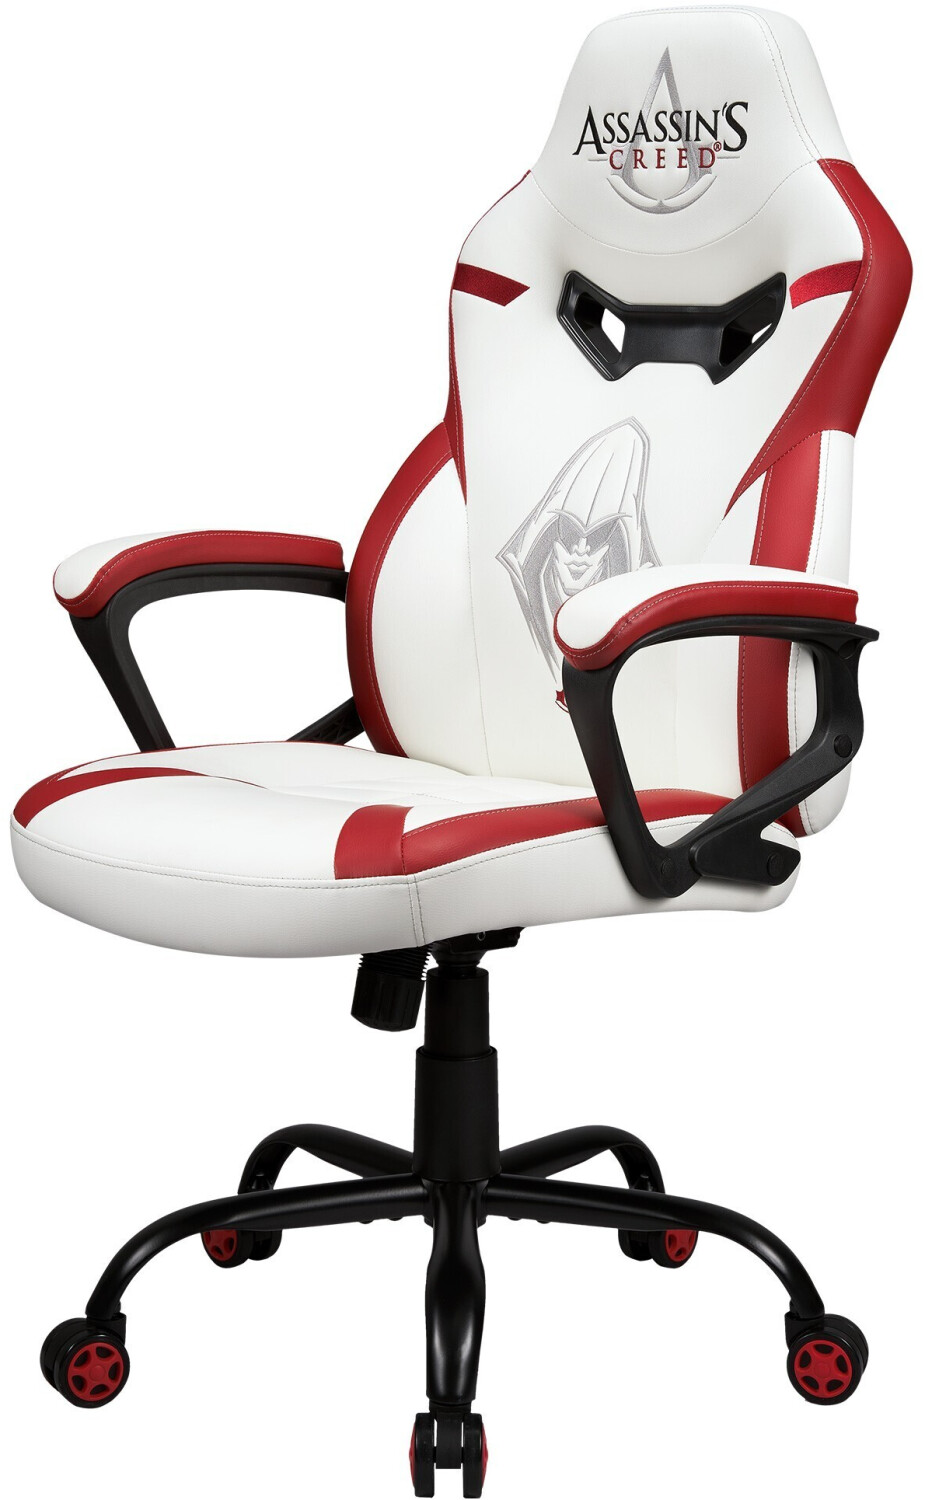 SuBsonic Junior Gaming Chair - Assassins Creed Stuhl